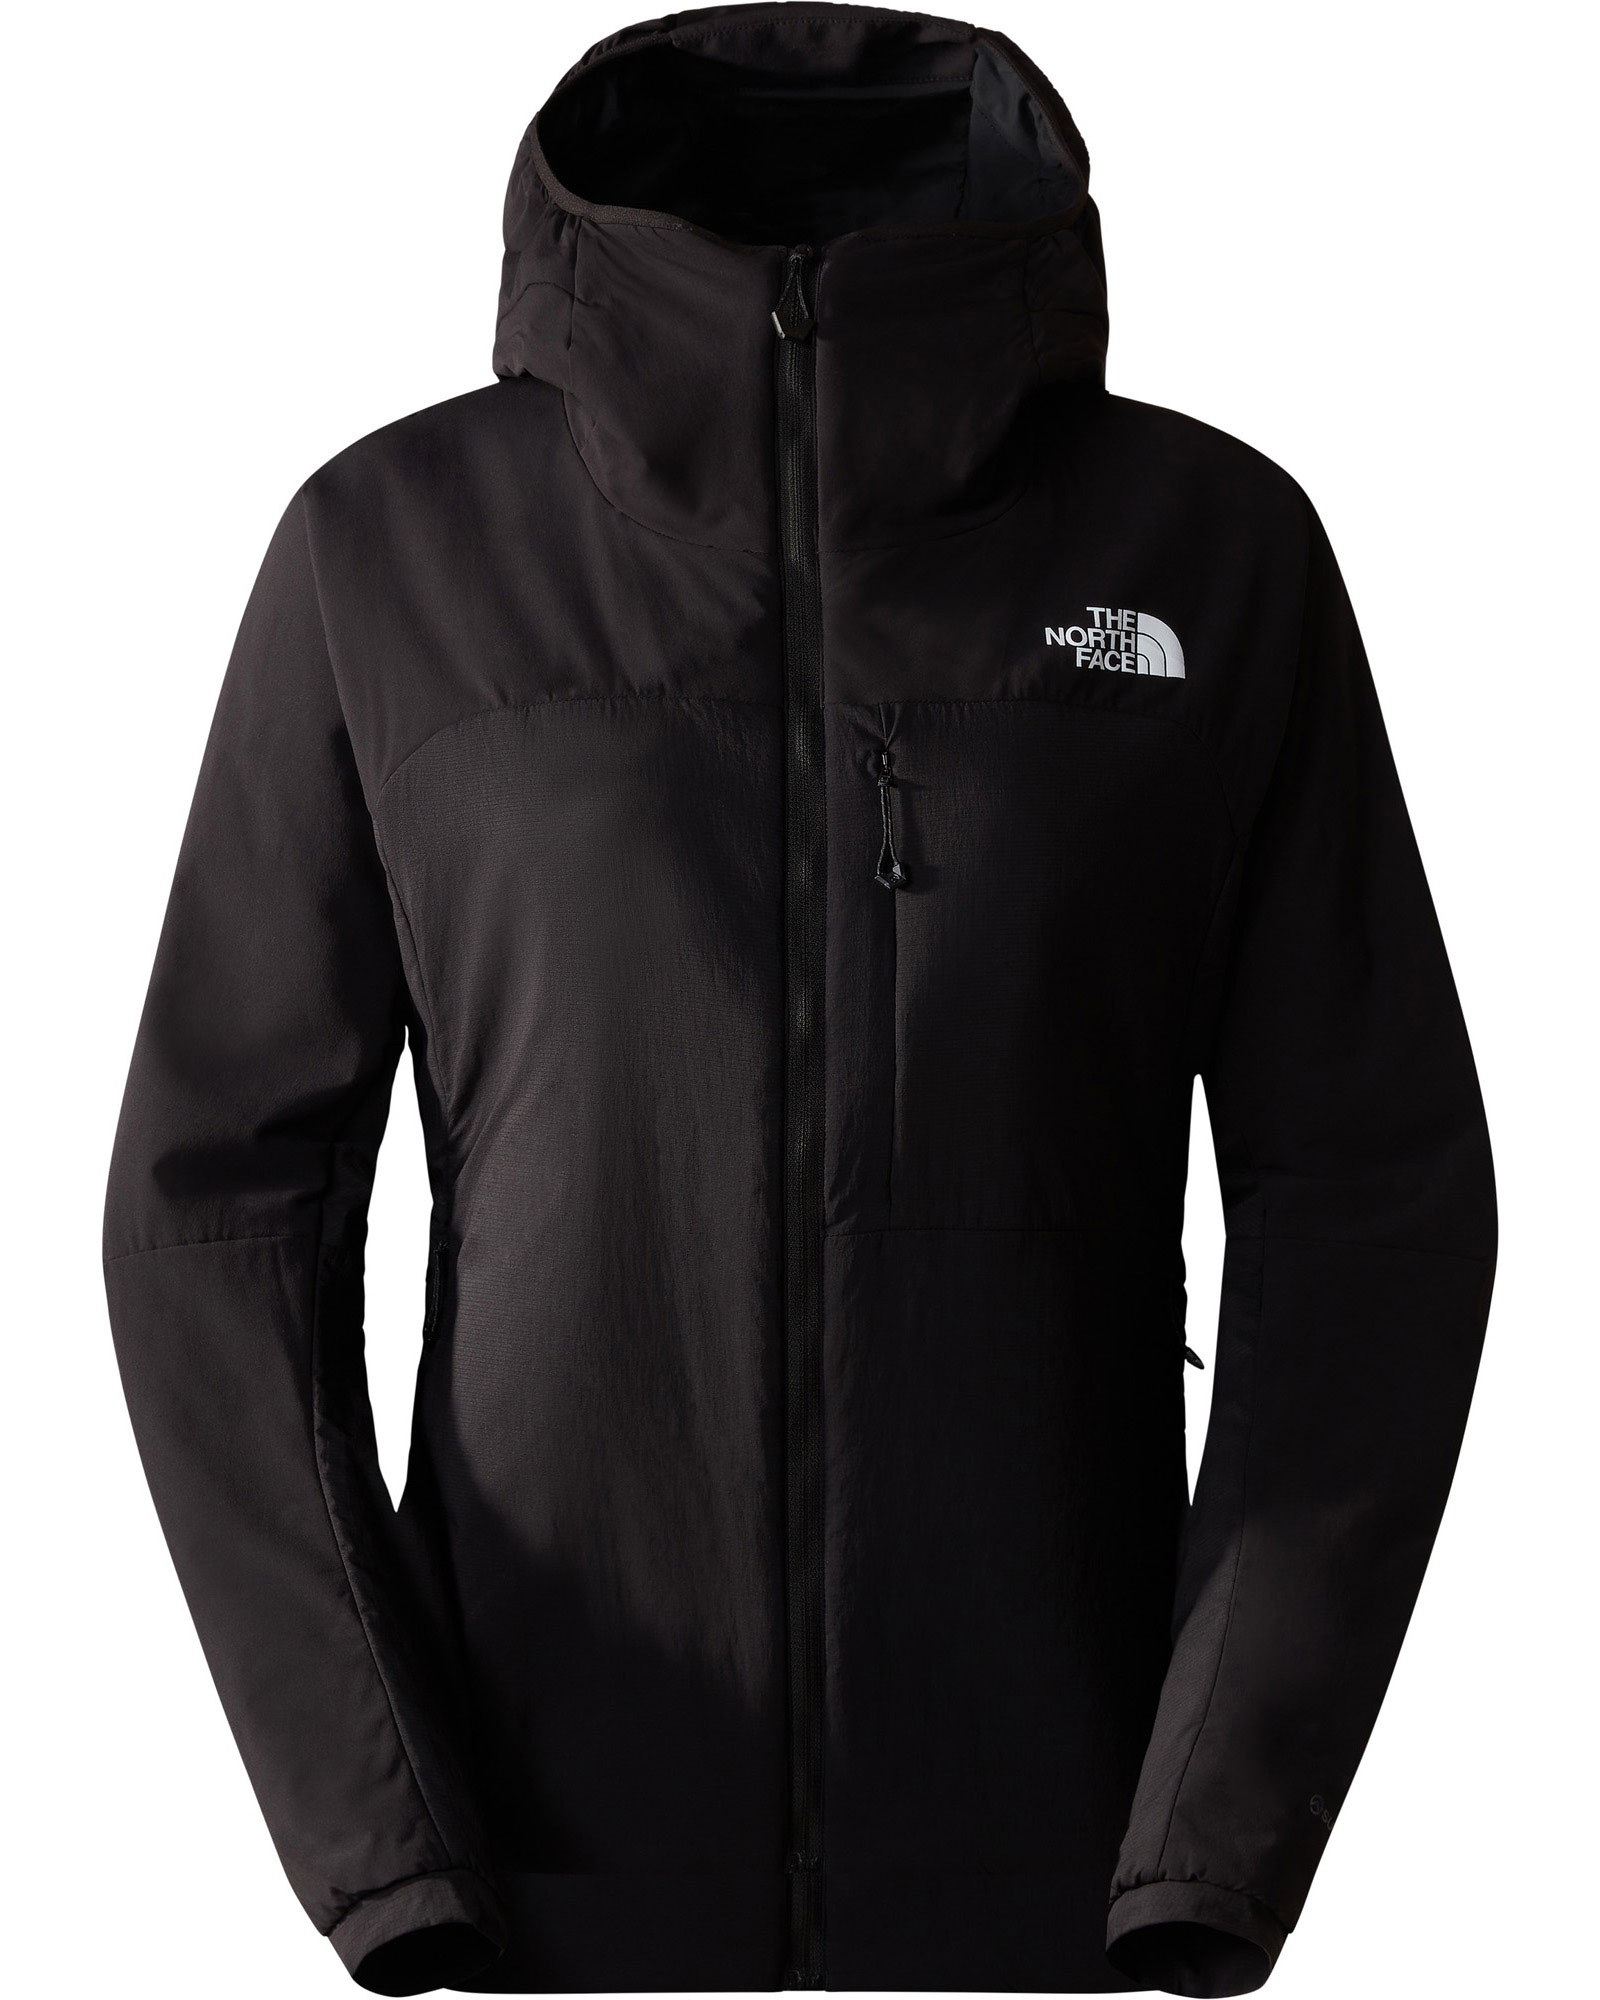 The North Face Summit Casaval Women’s Hoodie - TNF Black L